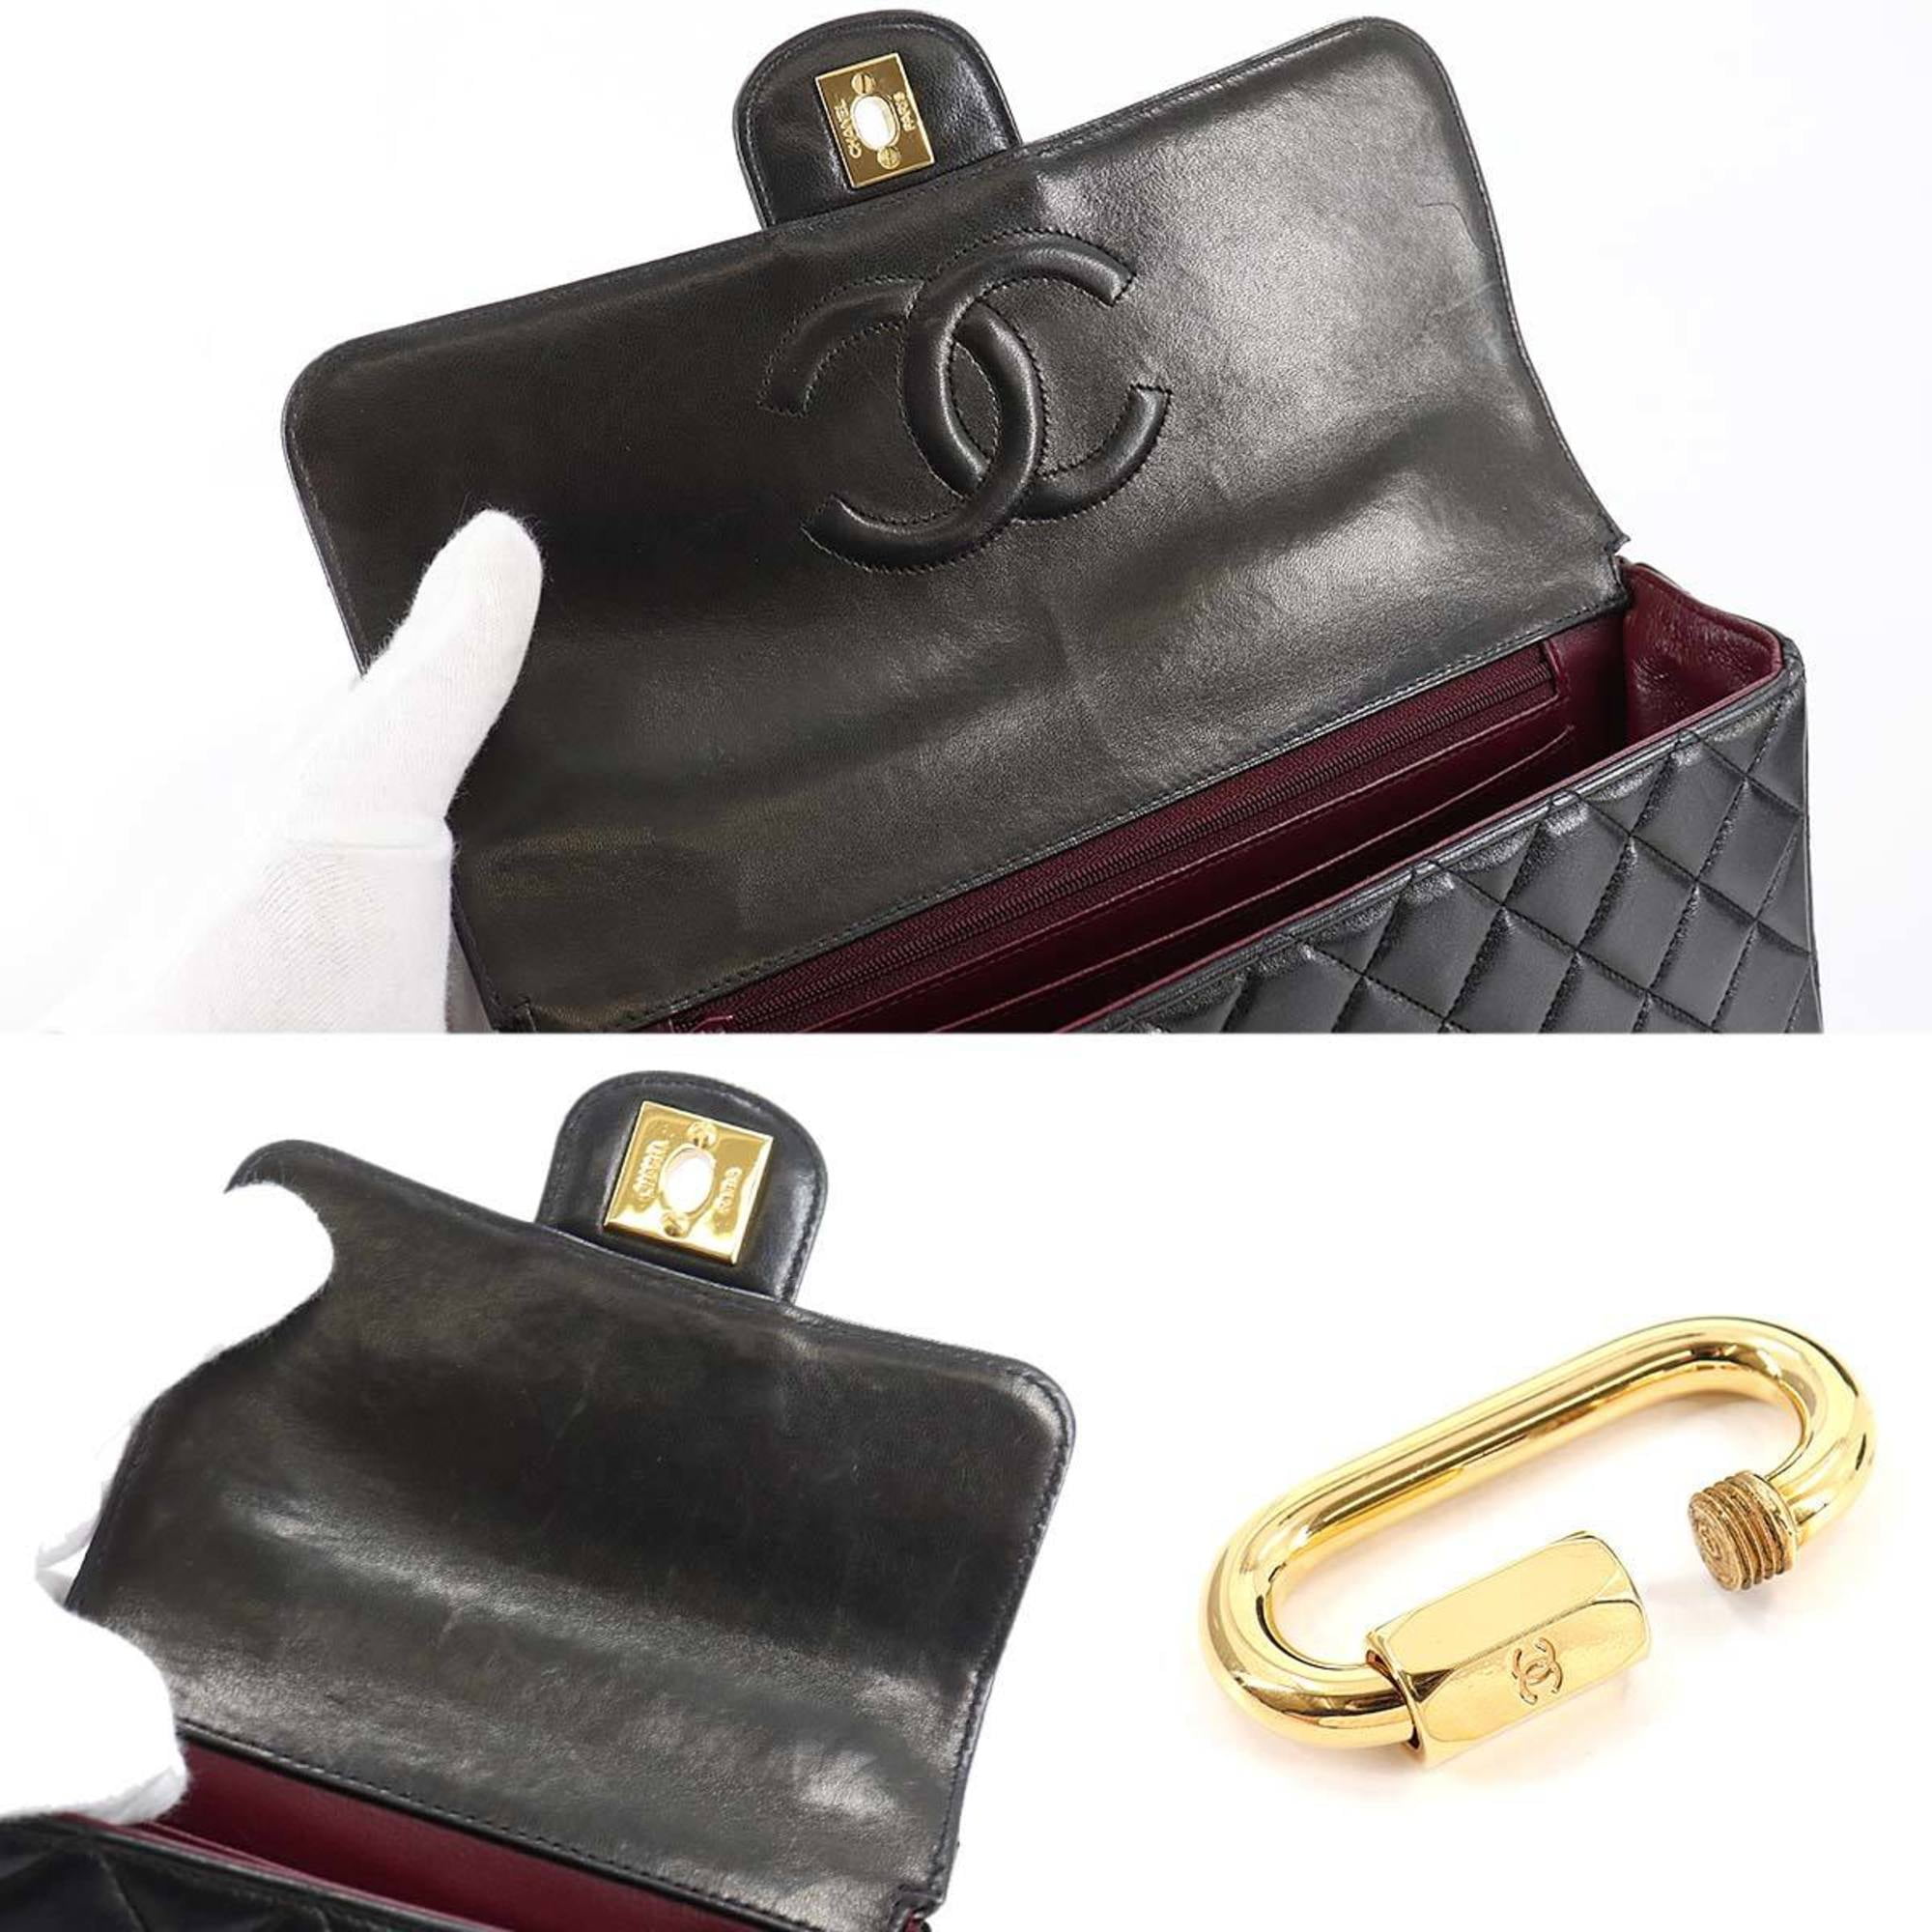 Pre-Owned Chanel CHANEL matelasse parent and child bag hand leather black  gold metal fittings vintage Matelasse Pair Bag (Like New) 